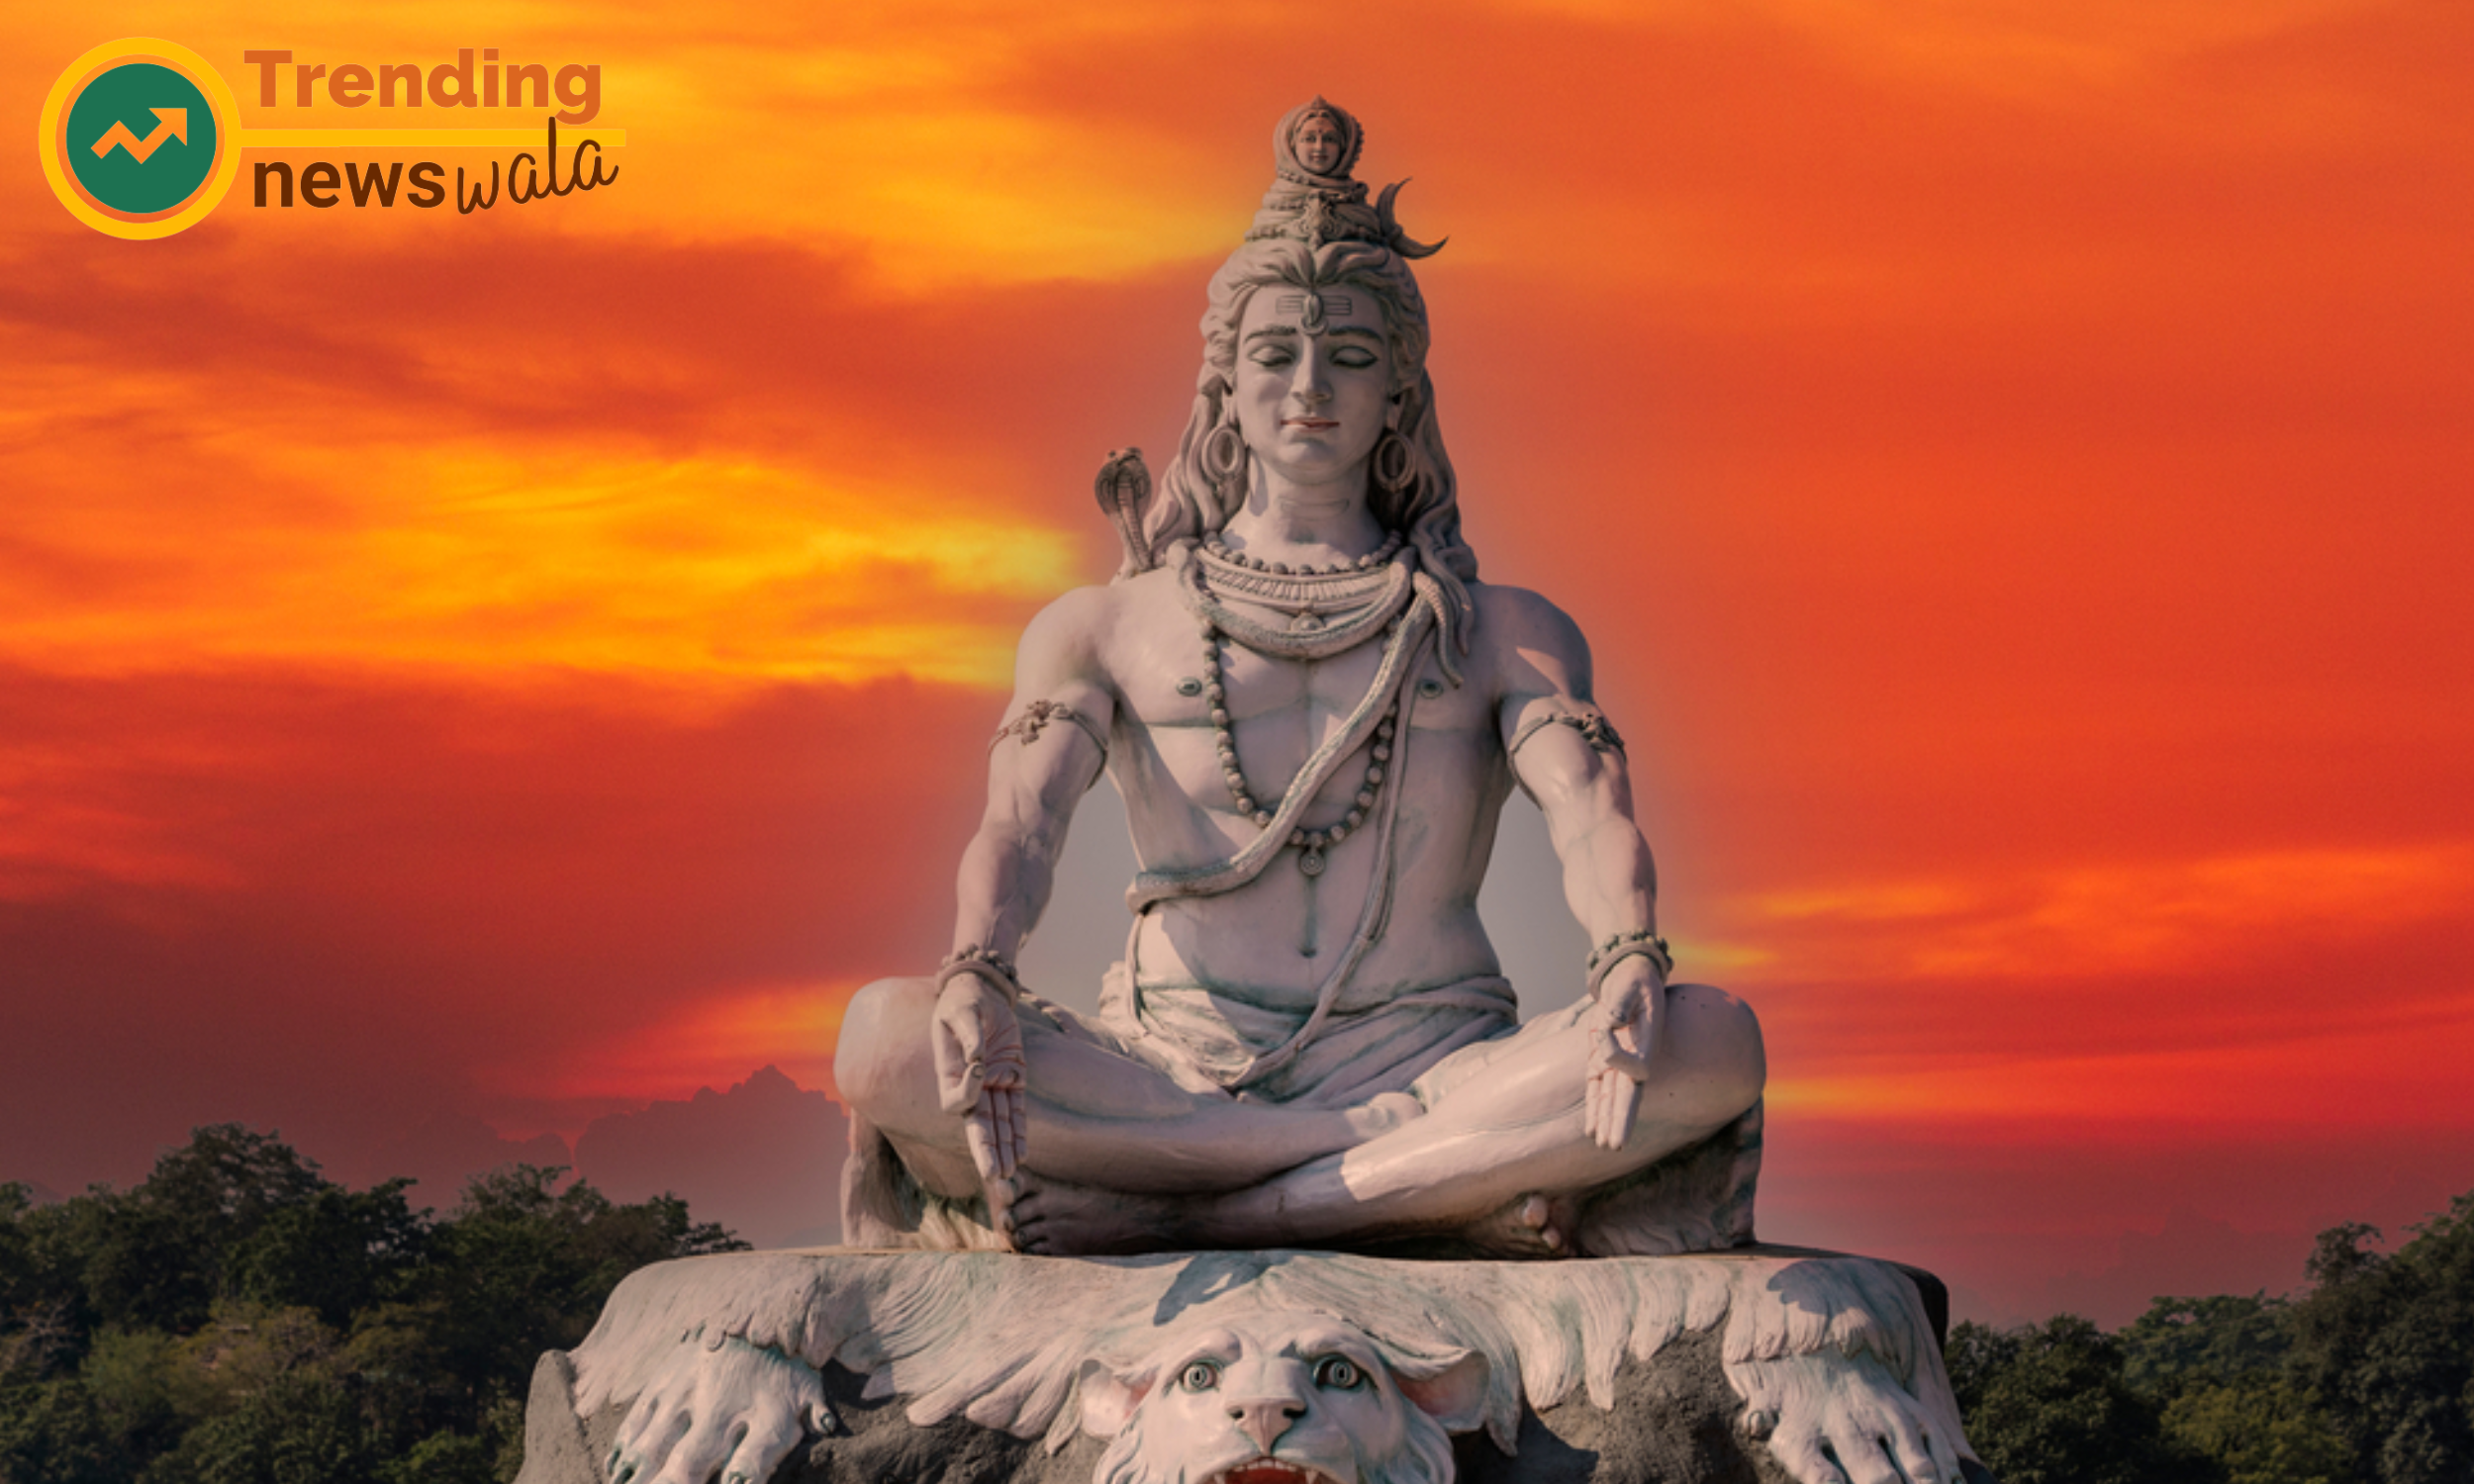 Shiva's role as the First Yogi emphasizes the profound significance of yoga